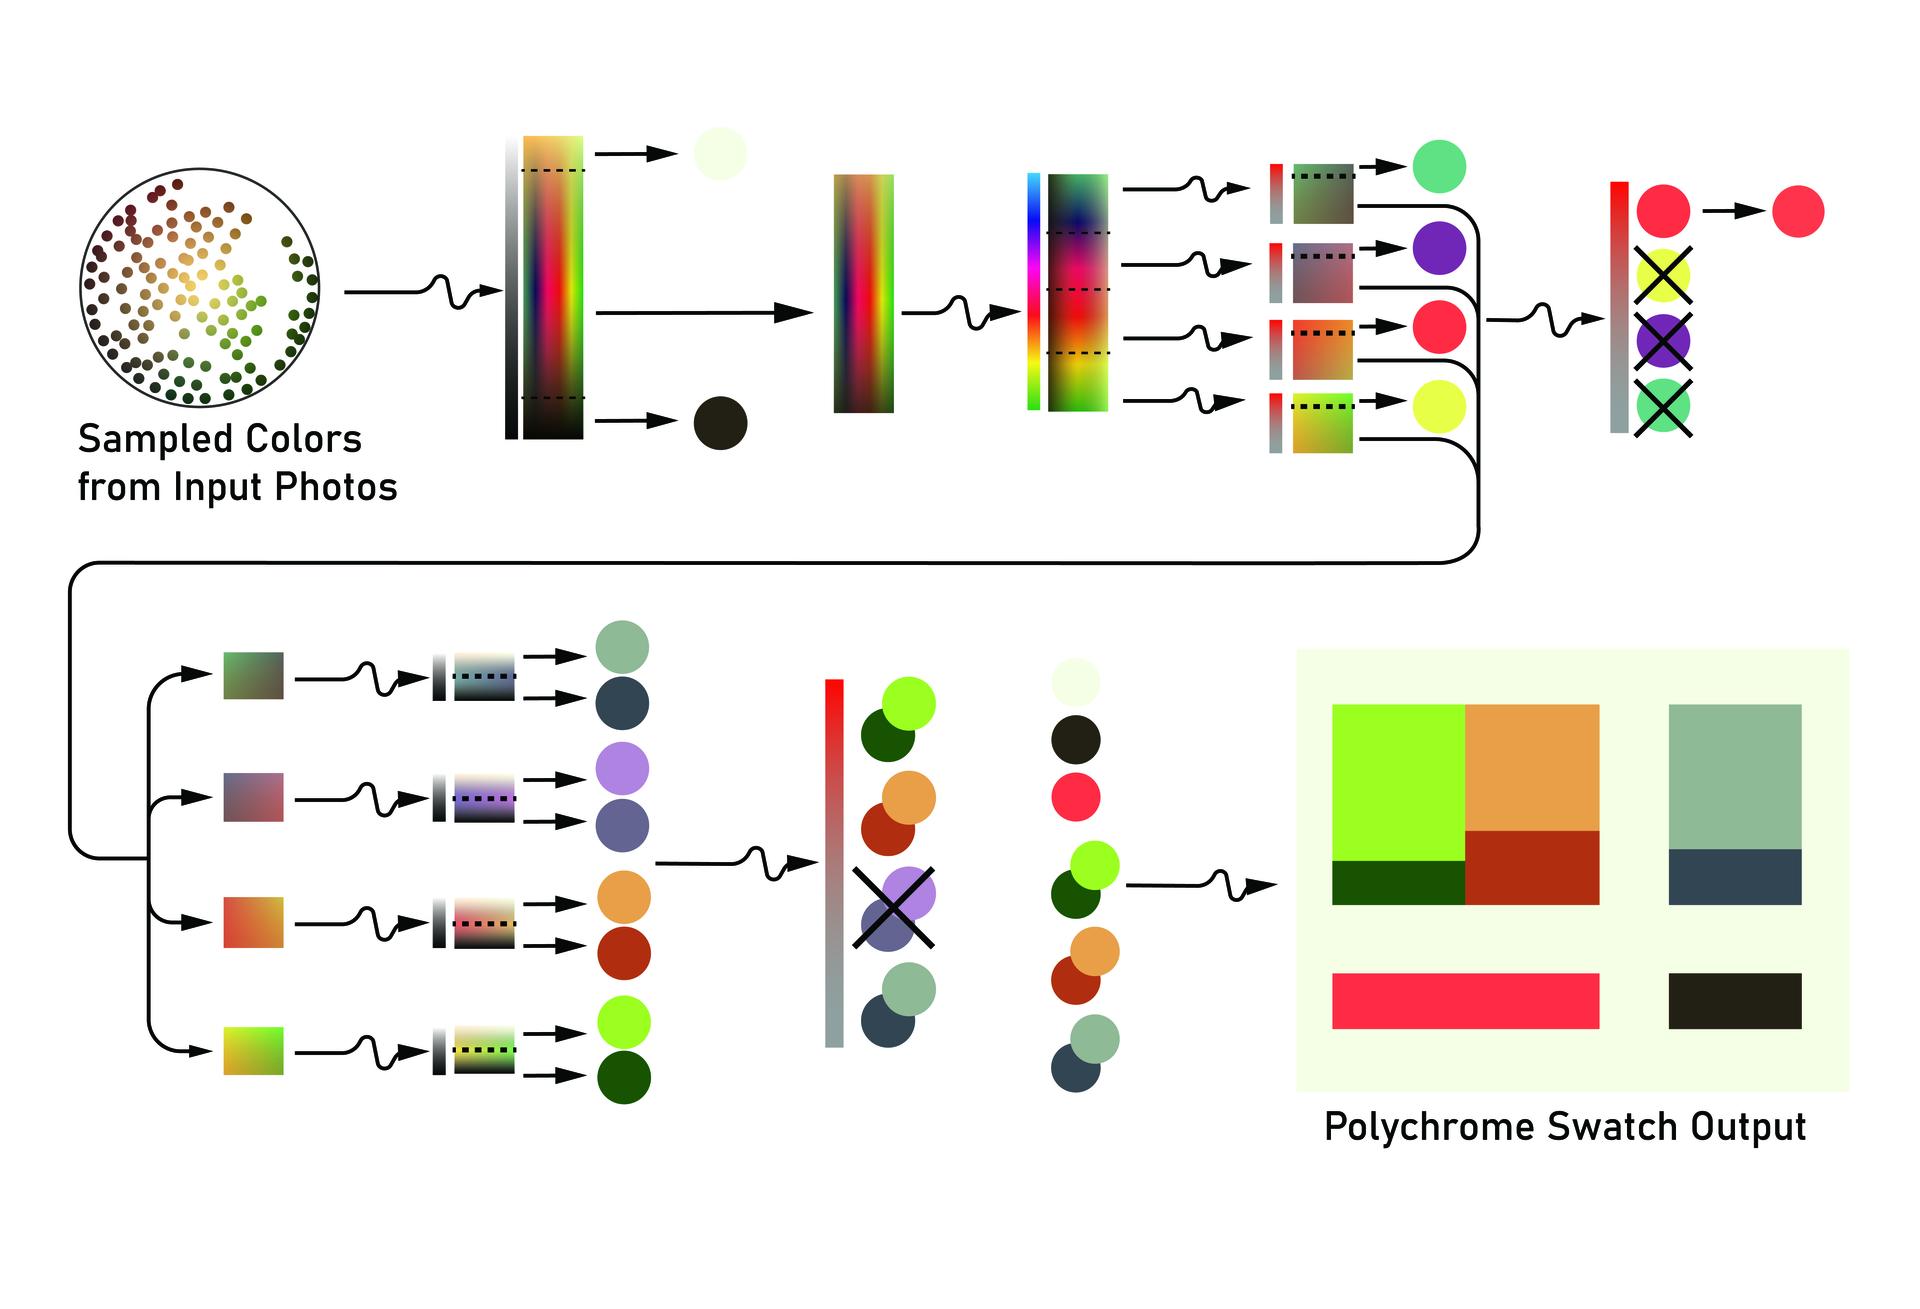 A flow chart depicting a data set of colors being reorganized by hue, value, and saturation in several steps to produce nine colors that coordinate and represent the data set.